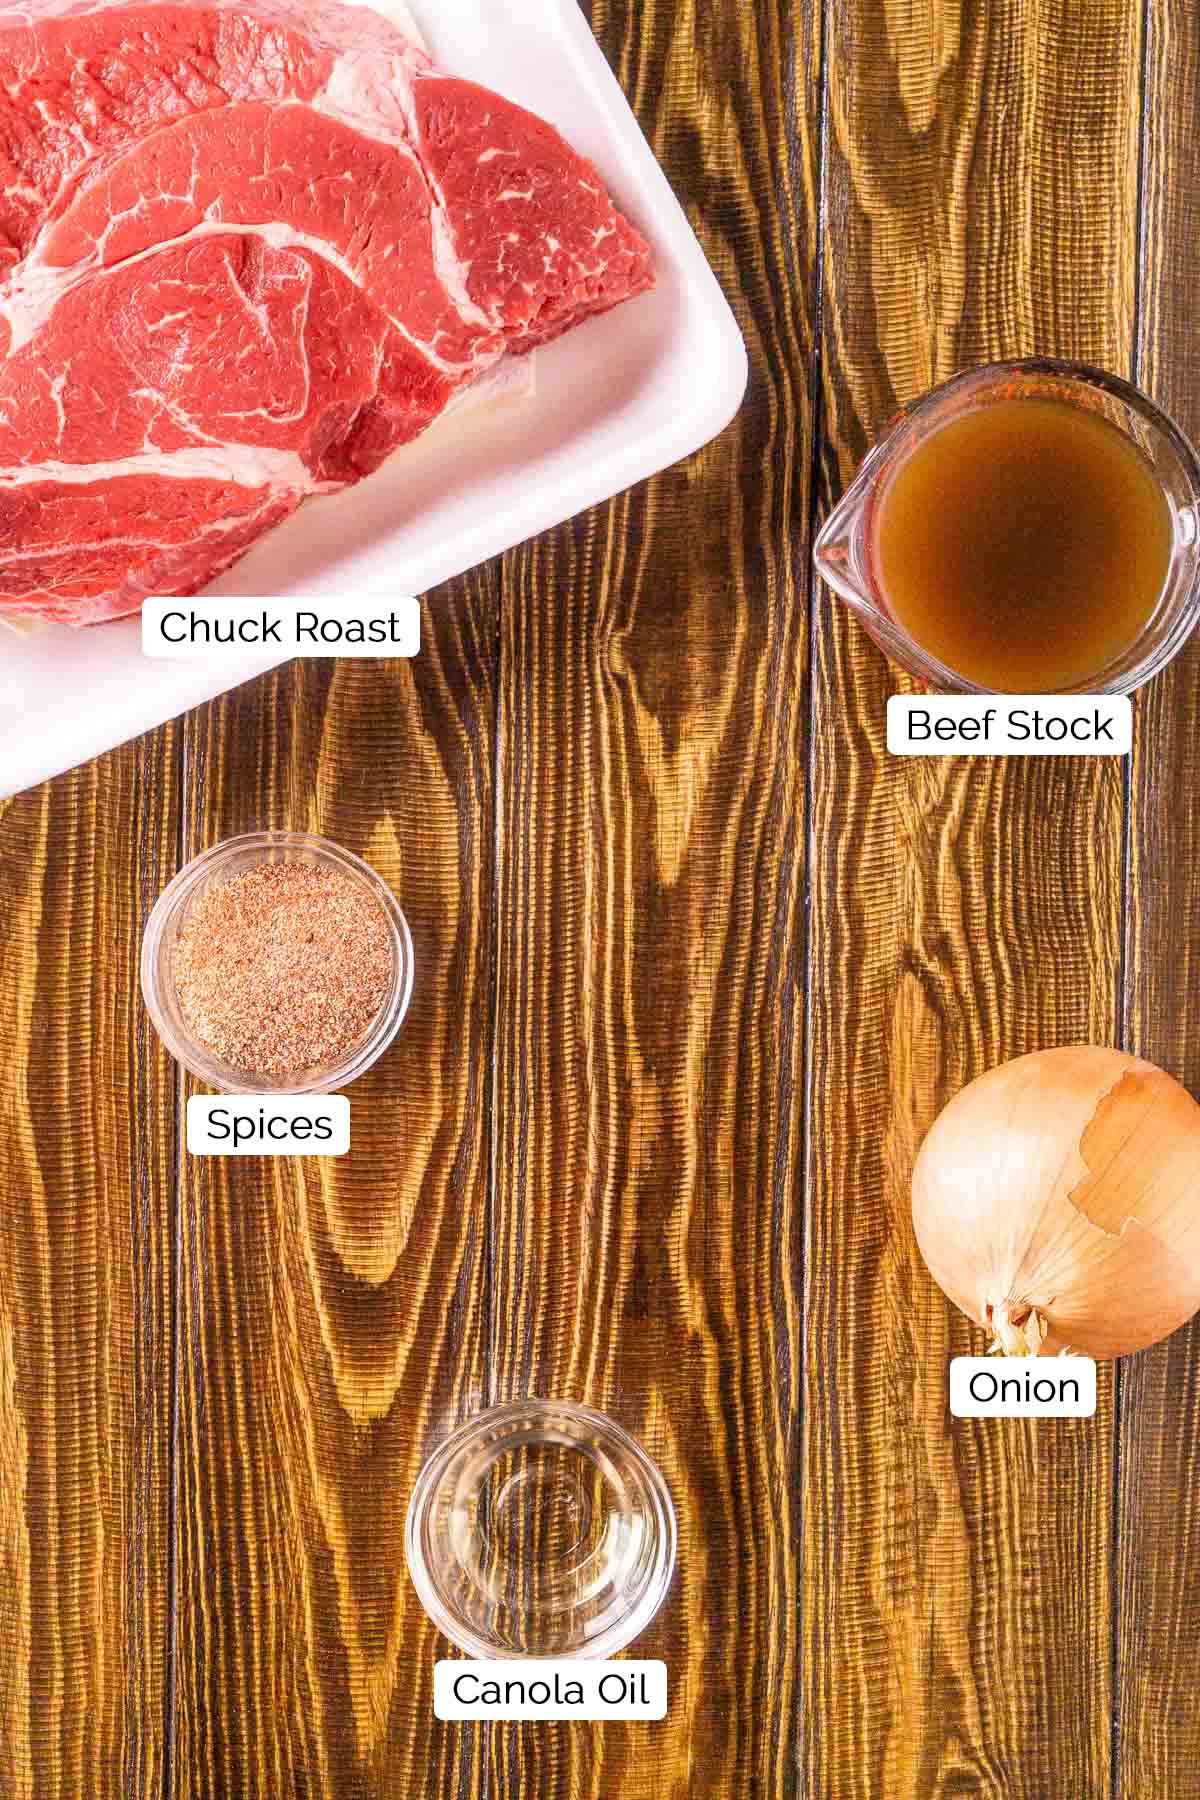 The beef ingredients on a brown wooden surface with black and white labels.